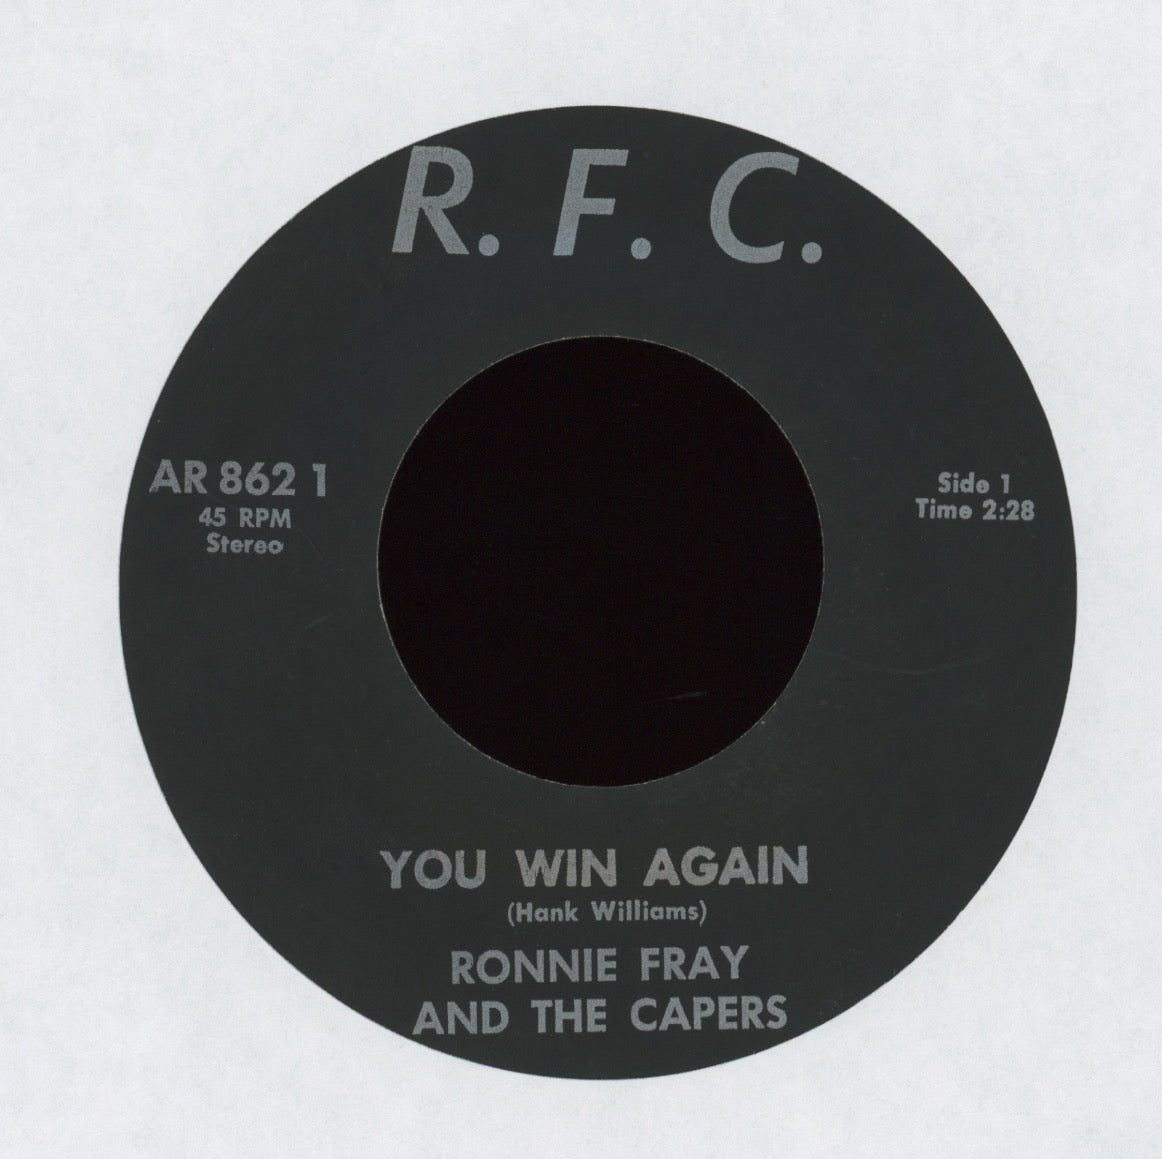 Ronnie Fray Capers - You Win Again on R.F.C.